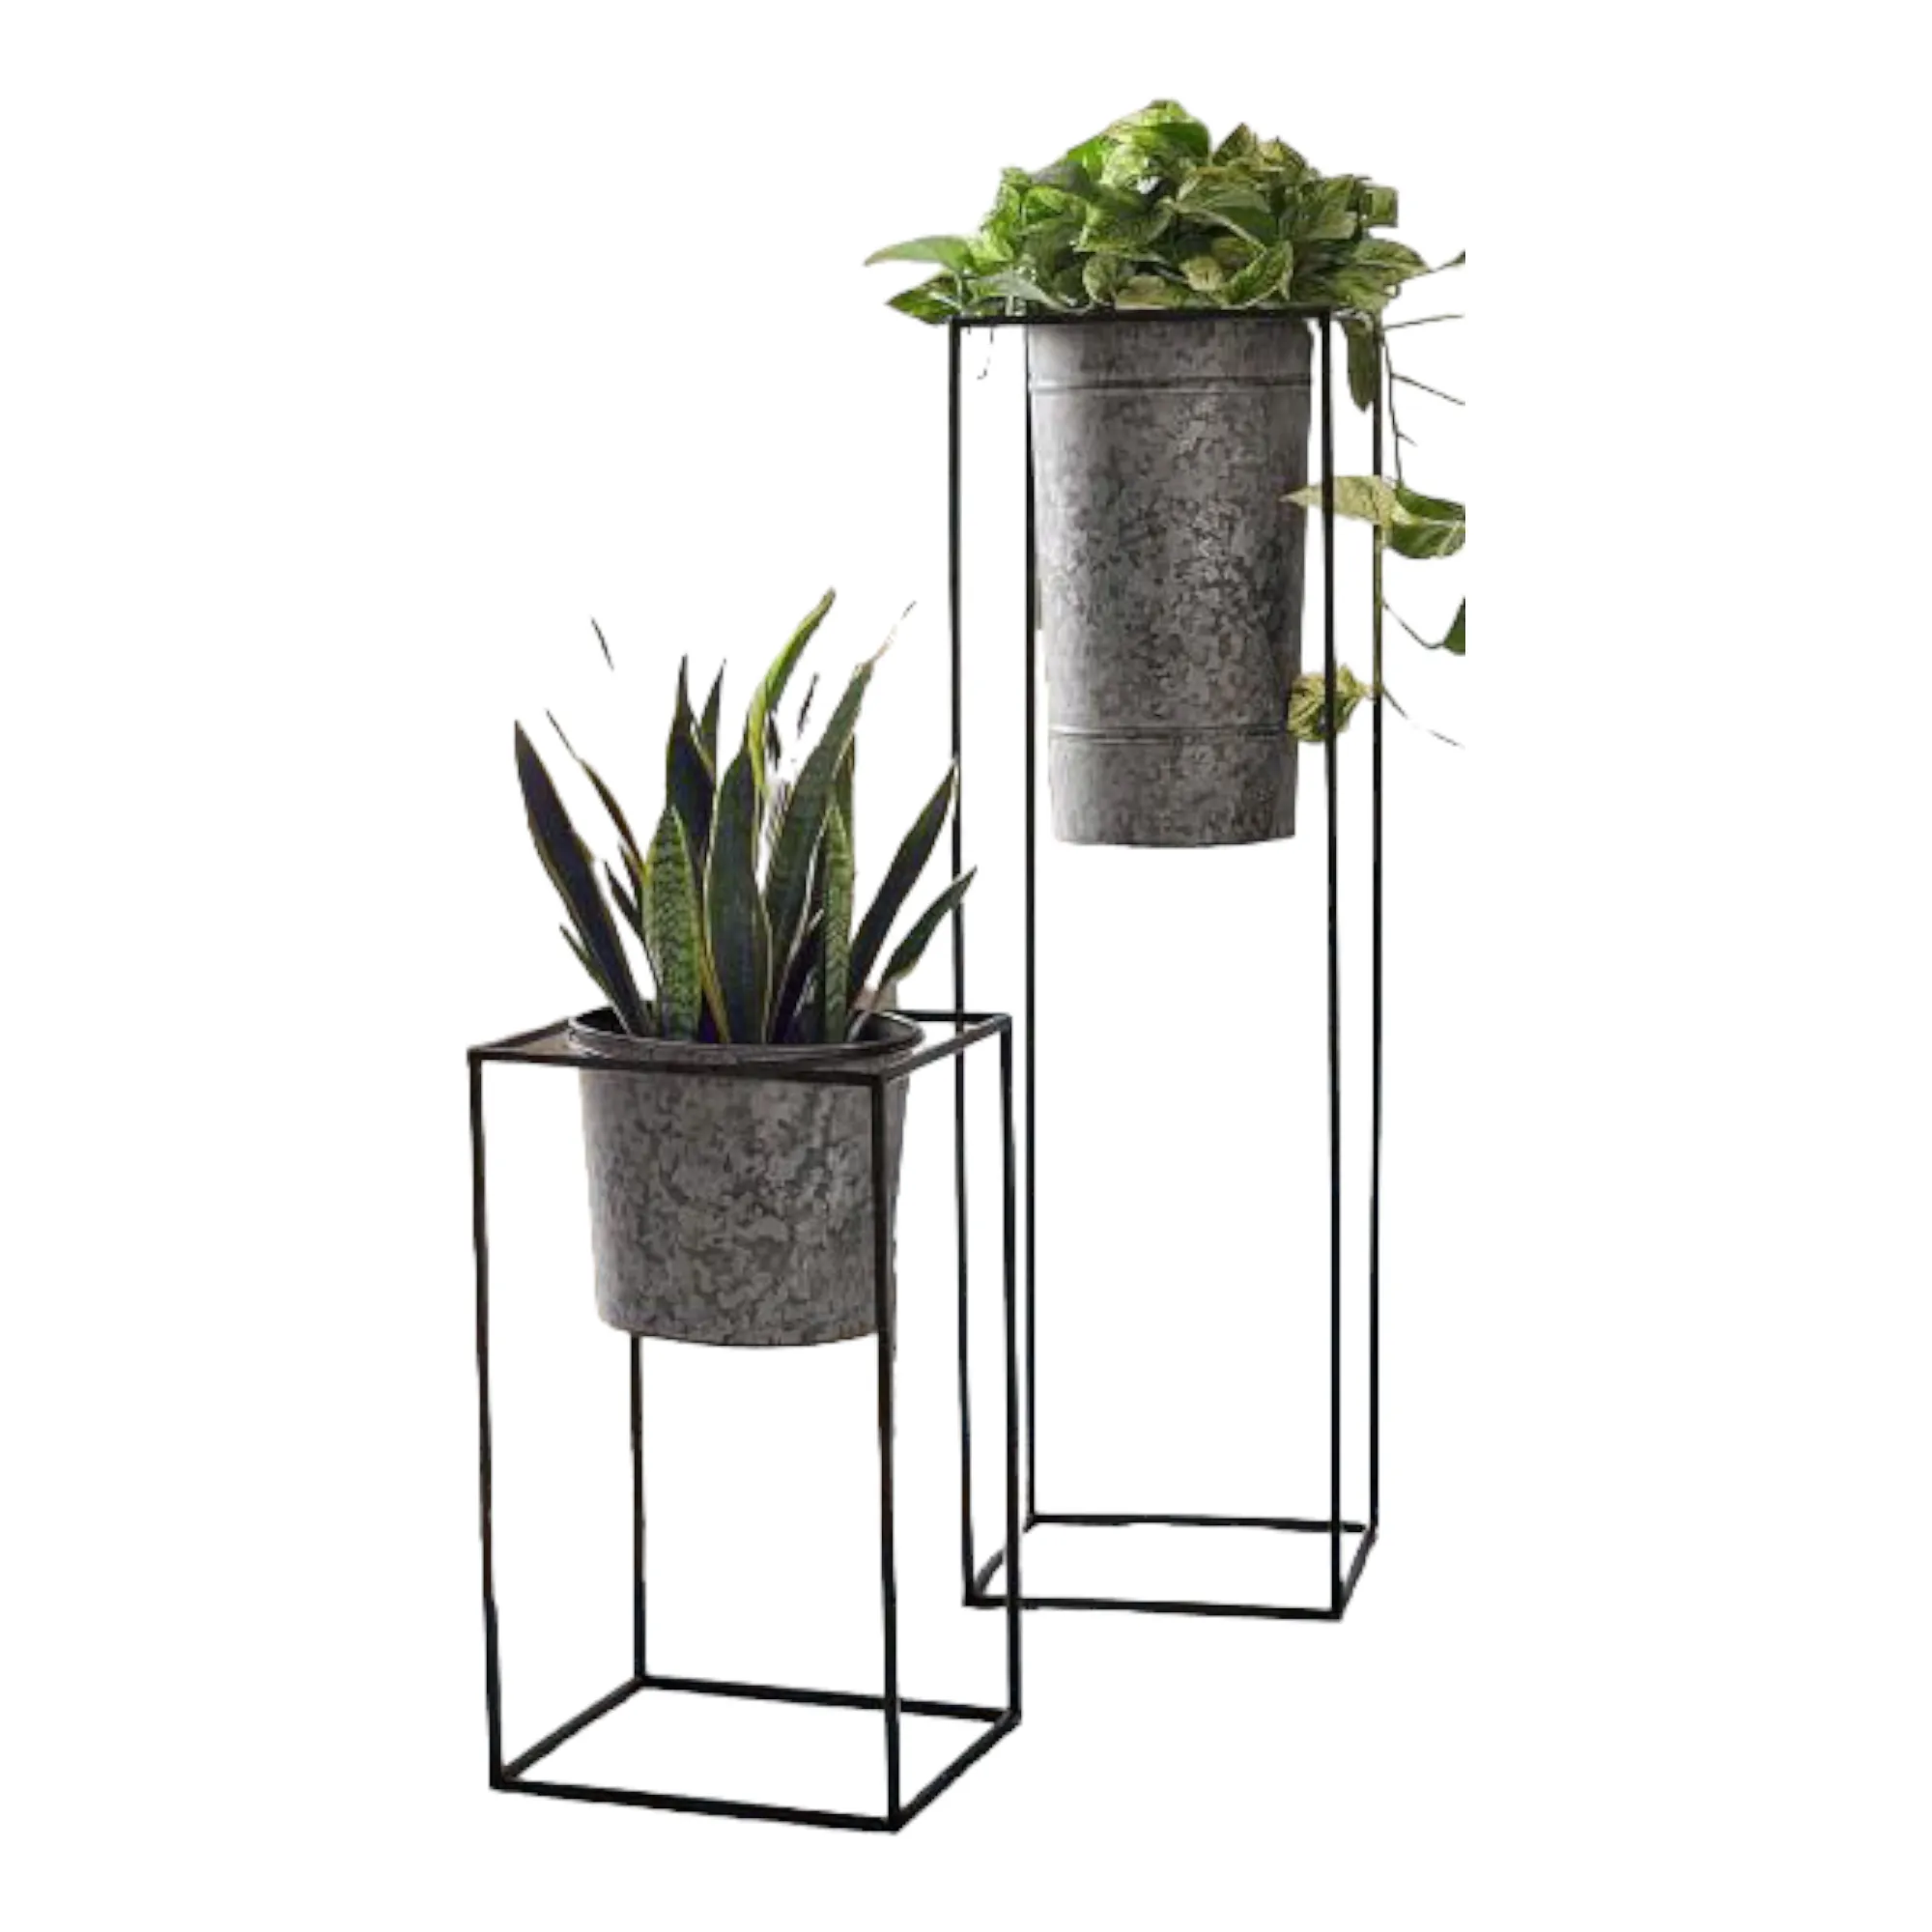 Custom Planter Plant Stand Indoor Outdoor Decorative Potted Holder for Home Decor Showpiece for Flower Pots & Planters